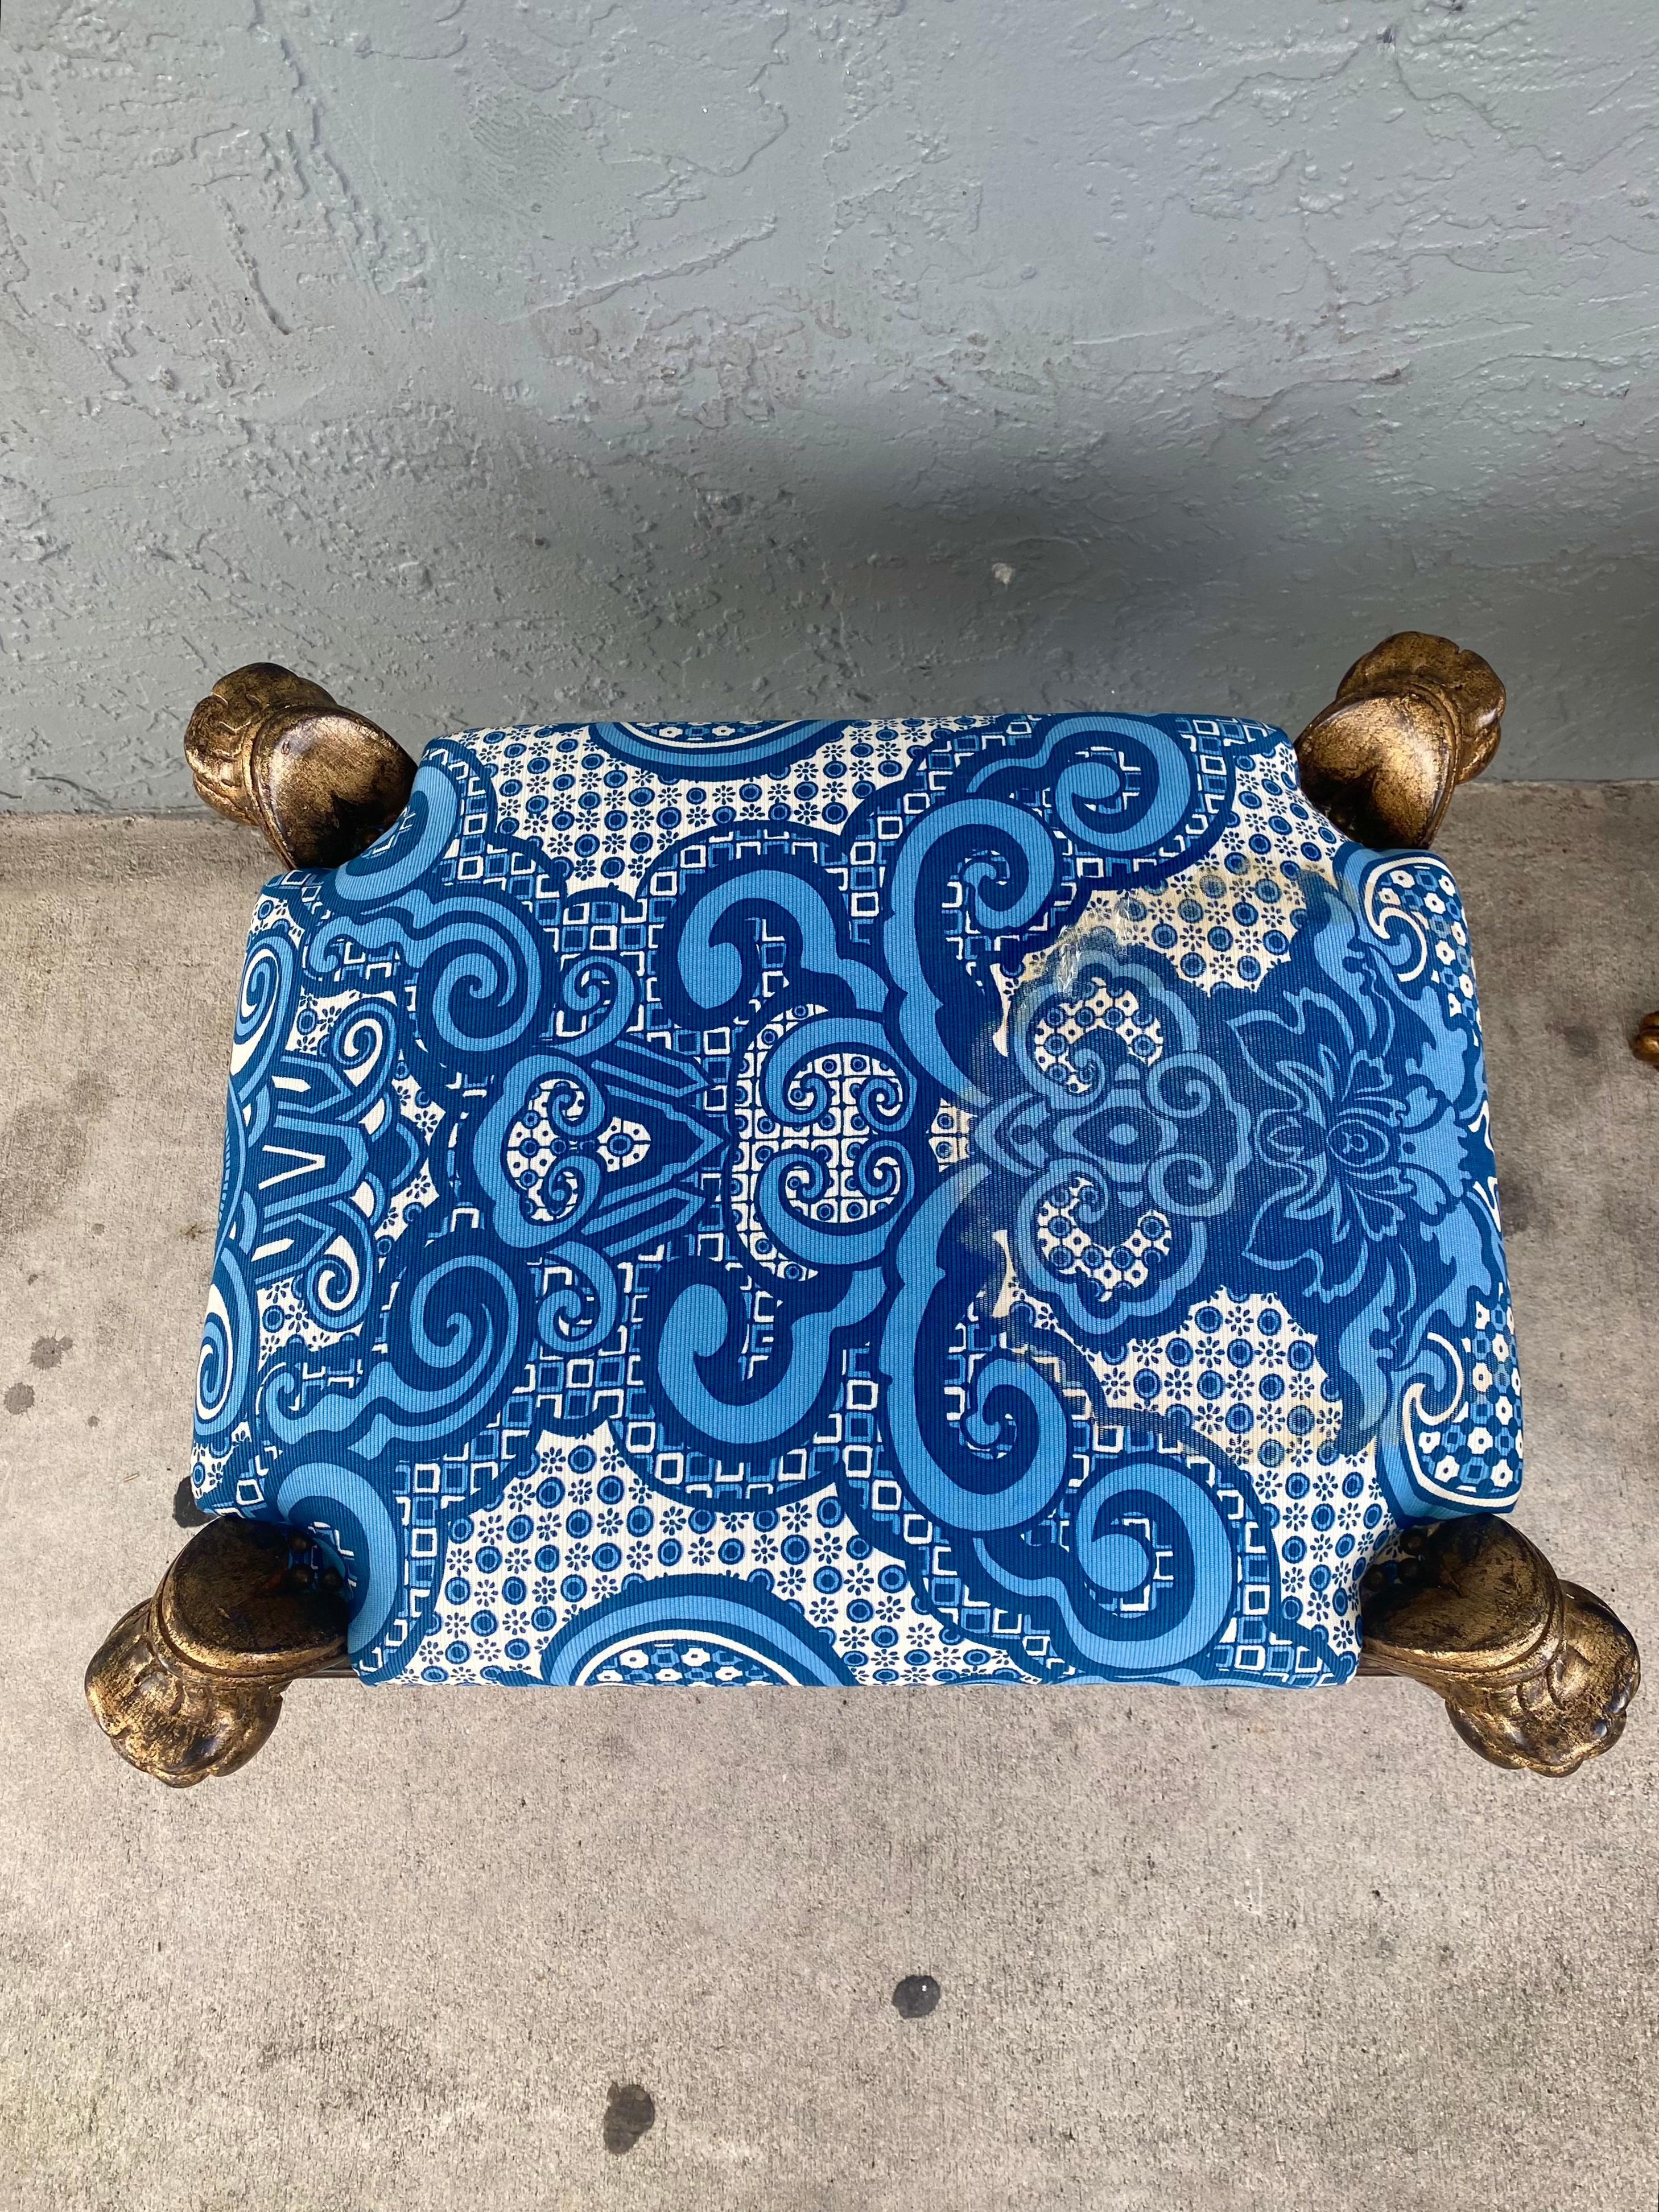 1960s Sculptural Carved Wood Lion Blue and White Bench Ottoman Stool For Sale 5